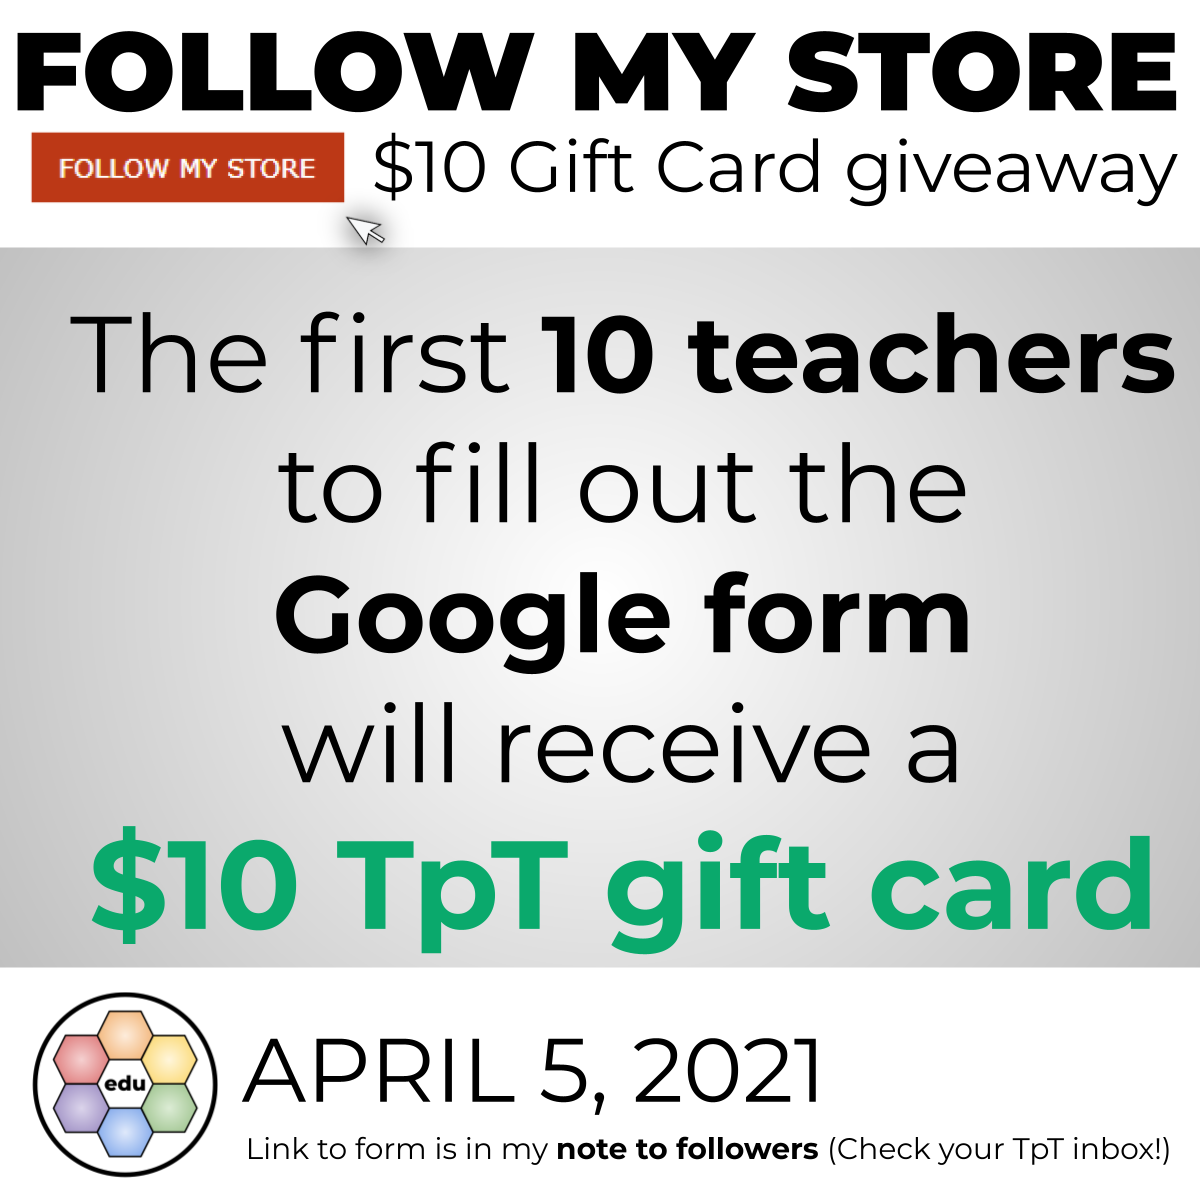 The first 10 teachers to fill out the google form will receive a $10 TpT gift card (April 5, 2021 TpT Gift Card Giveaway) - link to form is in my note to followers. (Check your TpT inbox)